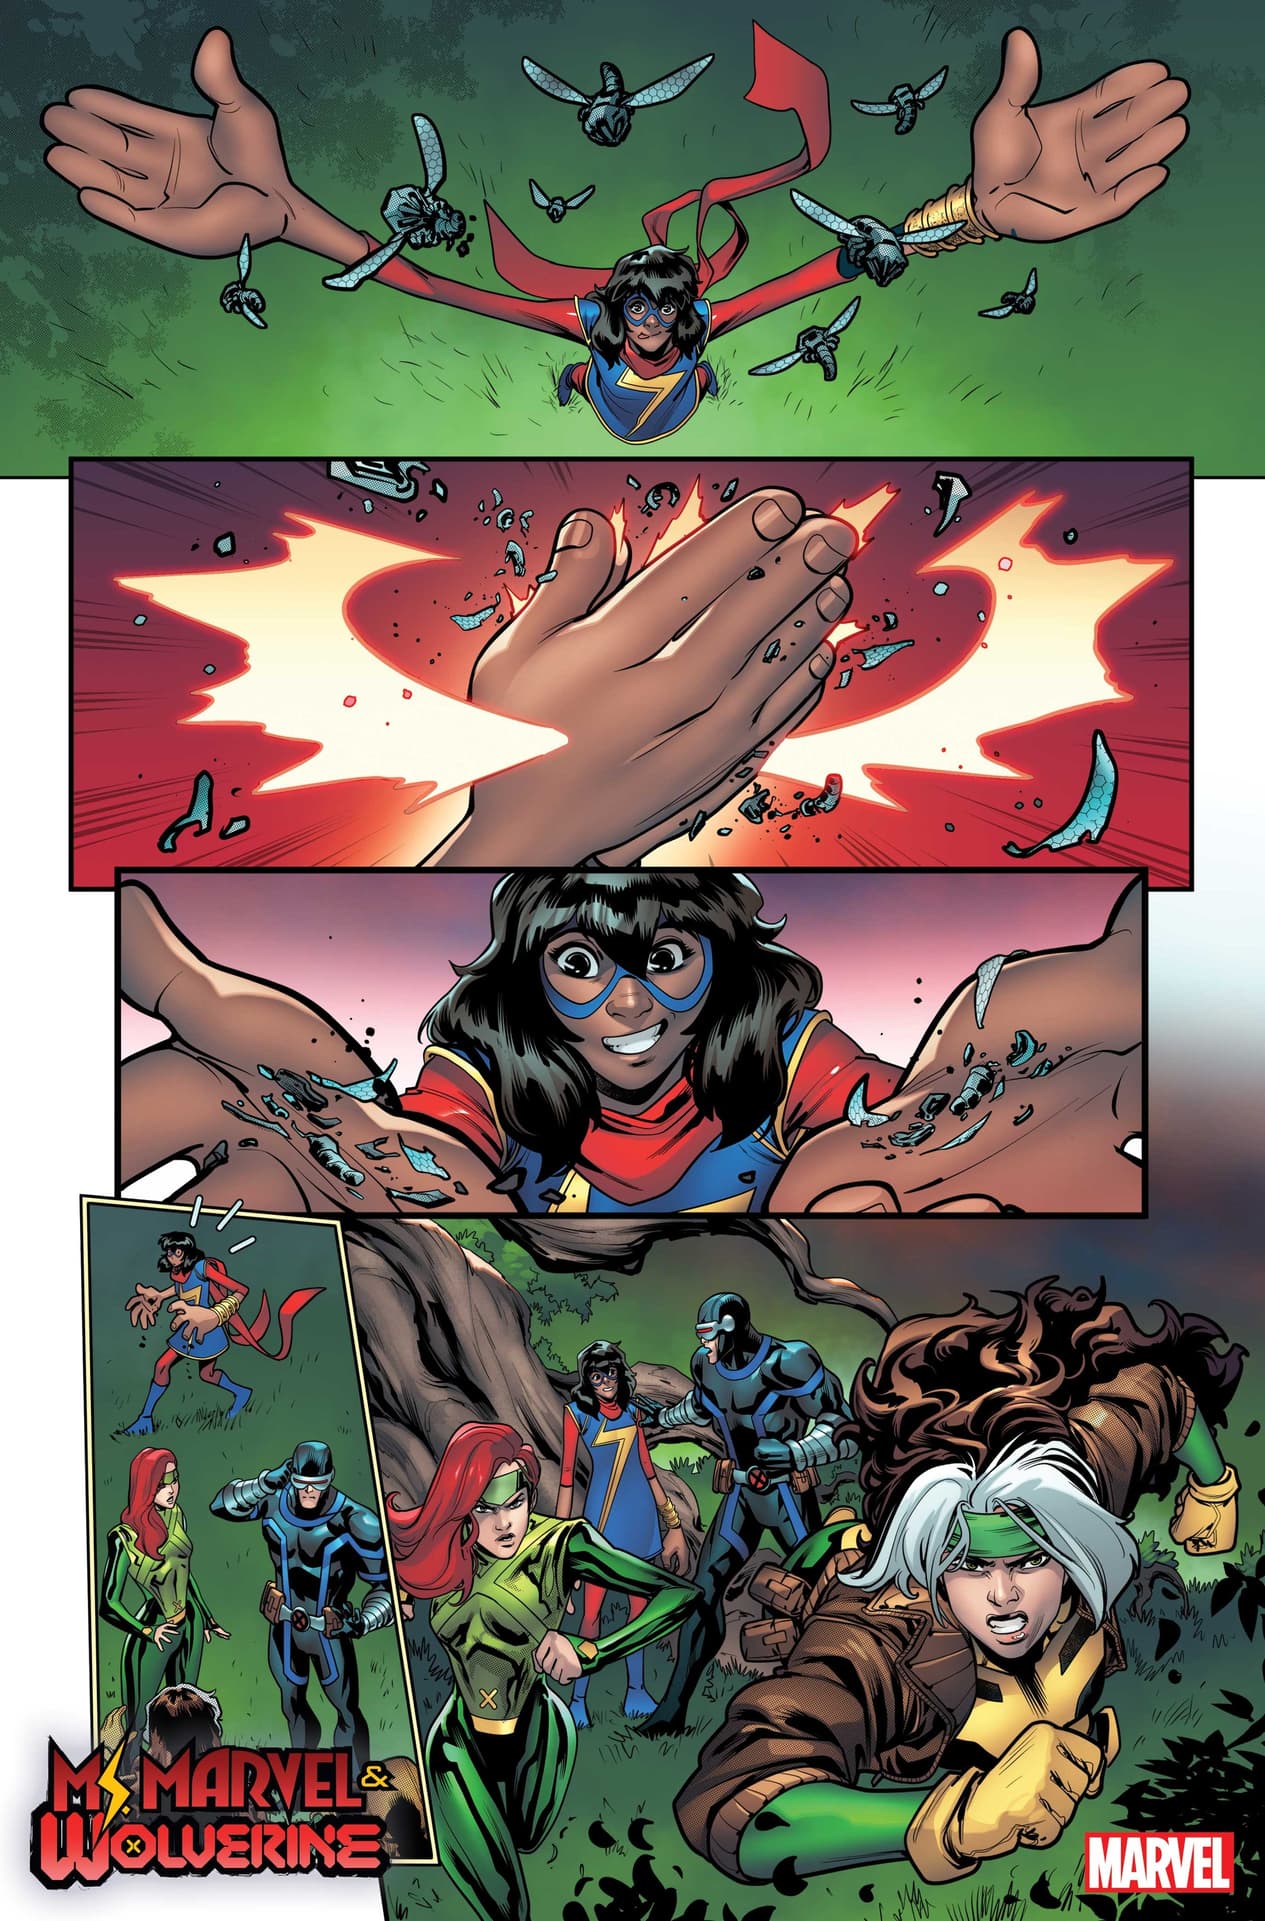 MS. MARVEL AND WOLERINE #1 artwork by Zé Carlos